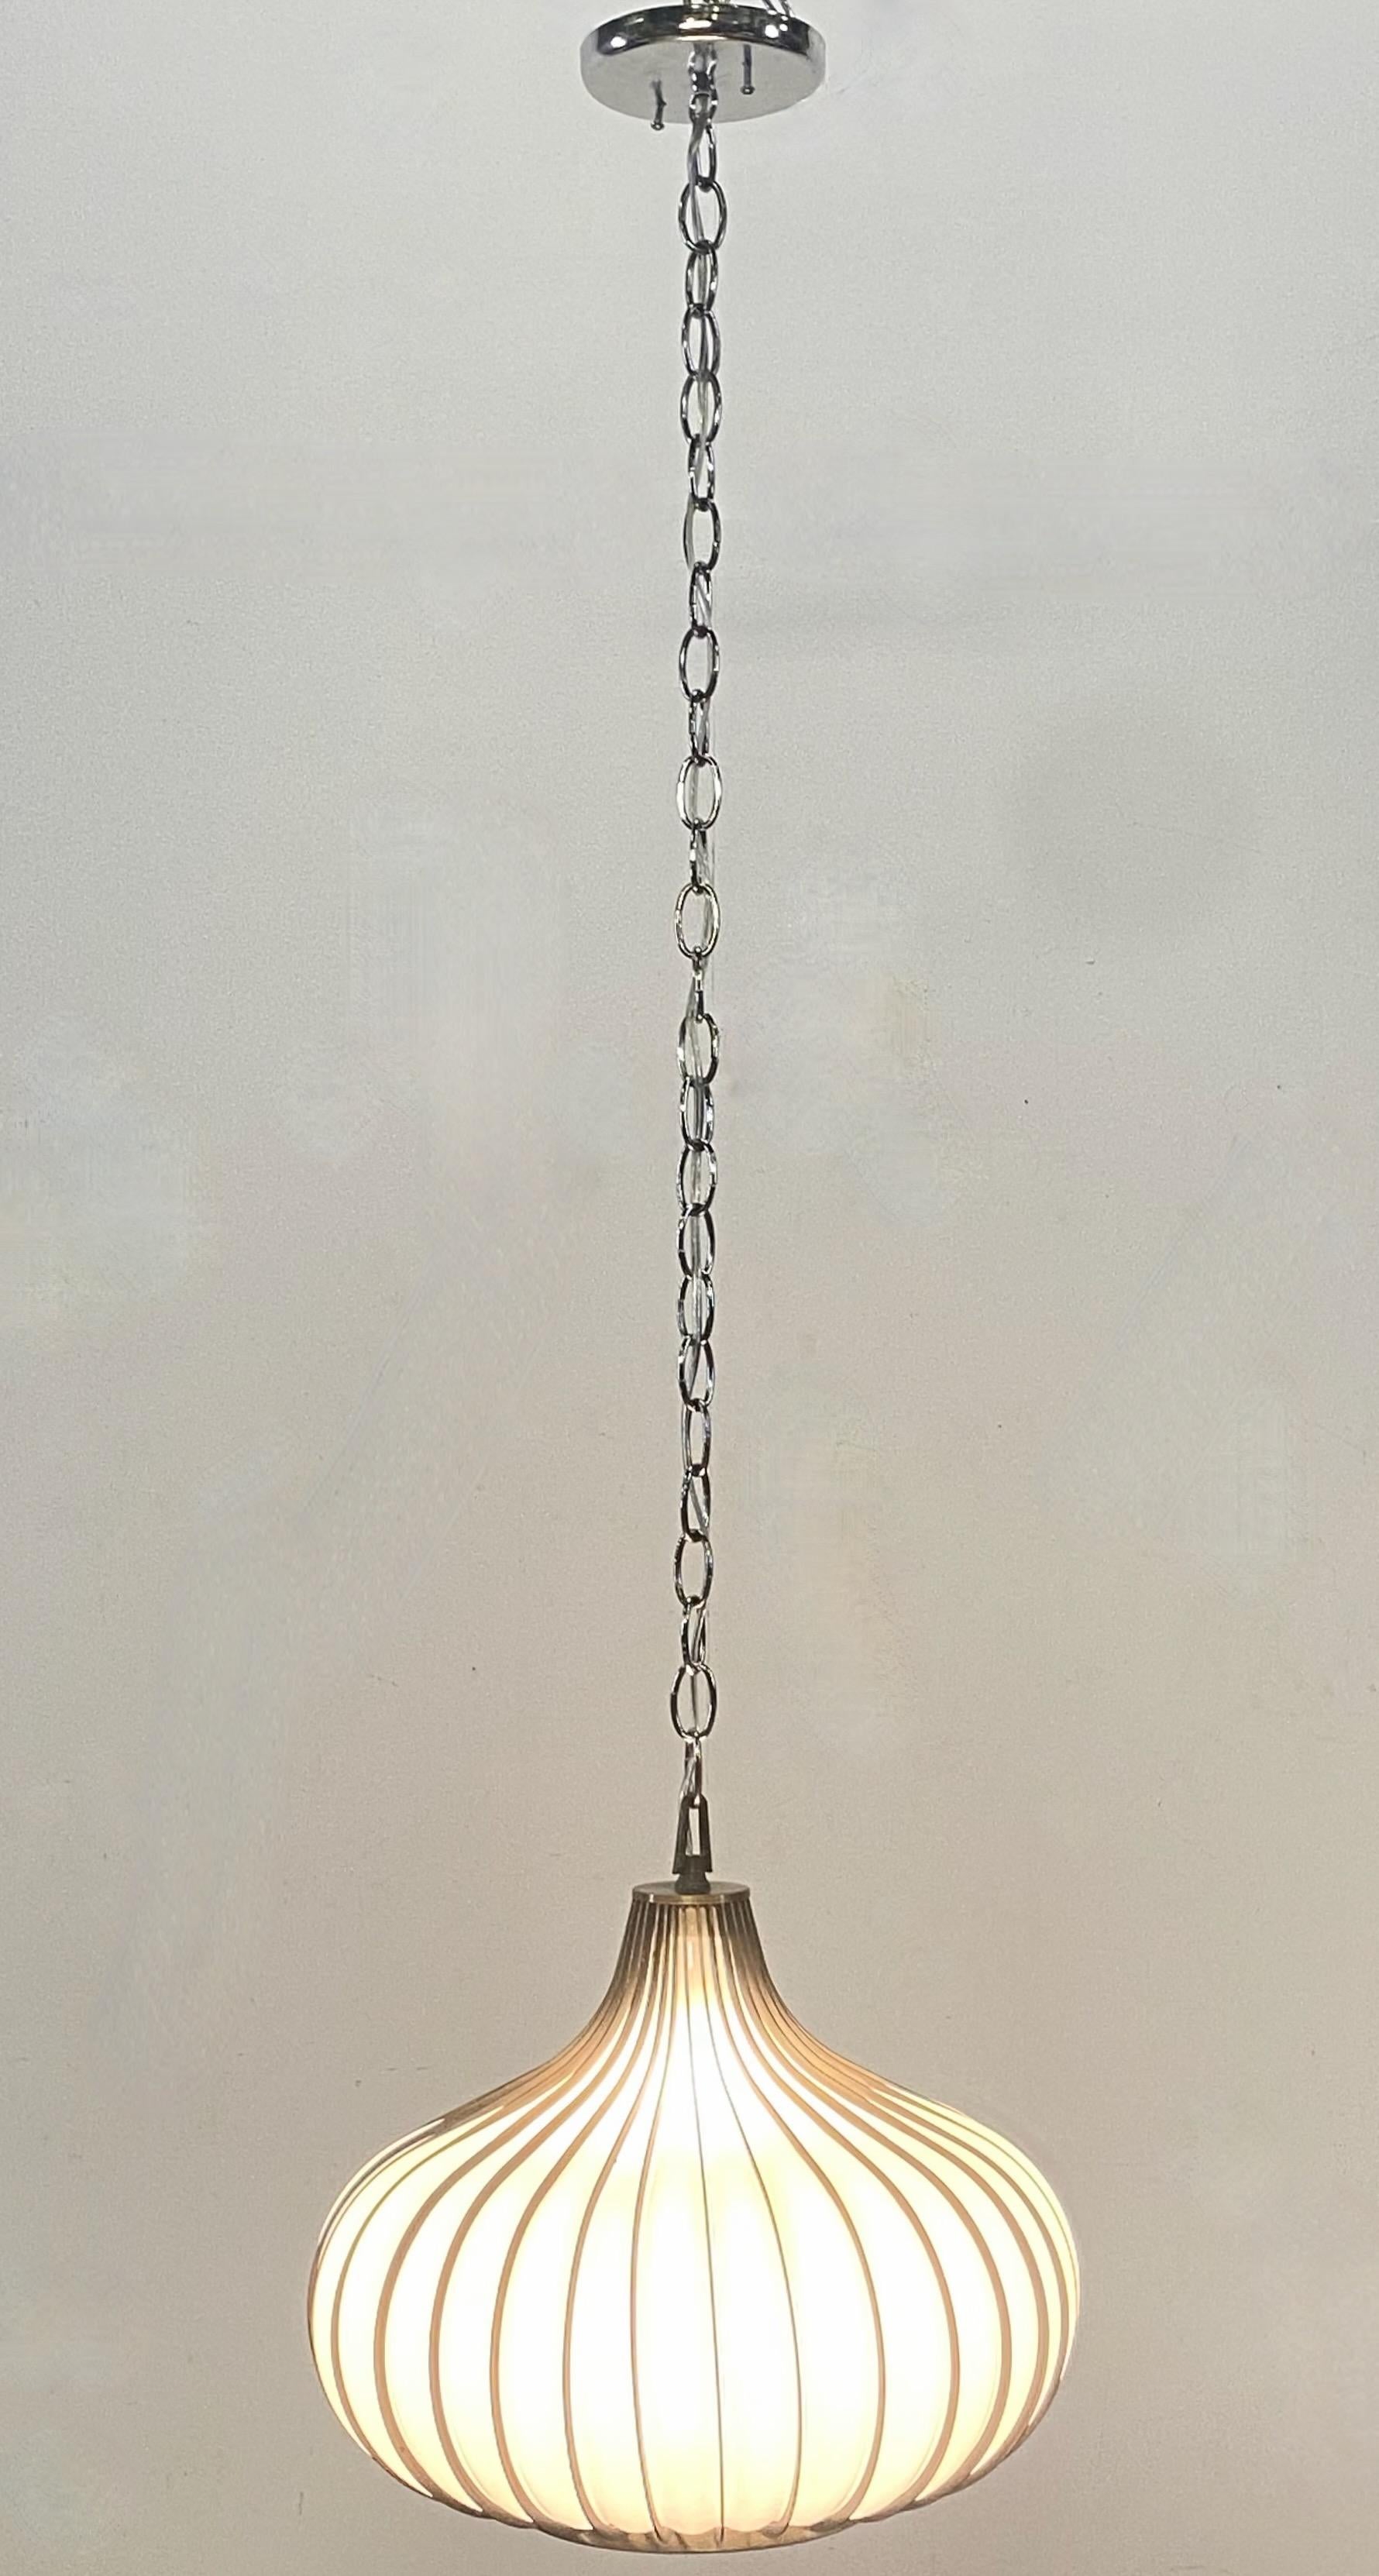 Mid-Century Modern style garlic or onion shaped, swag, pendant light fixture with
blown white glass shade encased in a steel frame. 
Newly re-wired, re-furbished and ready to install.
American 1960's.
In excellent condition.
We can shorten the